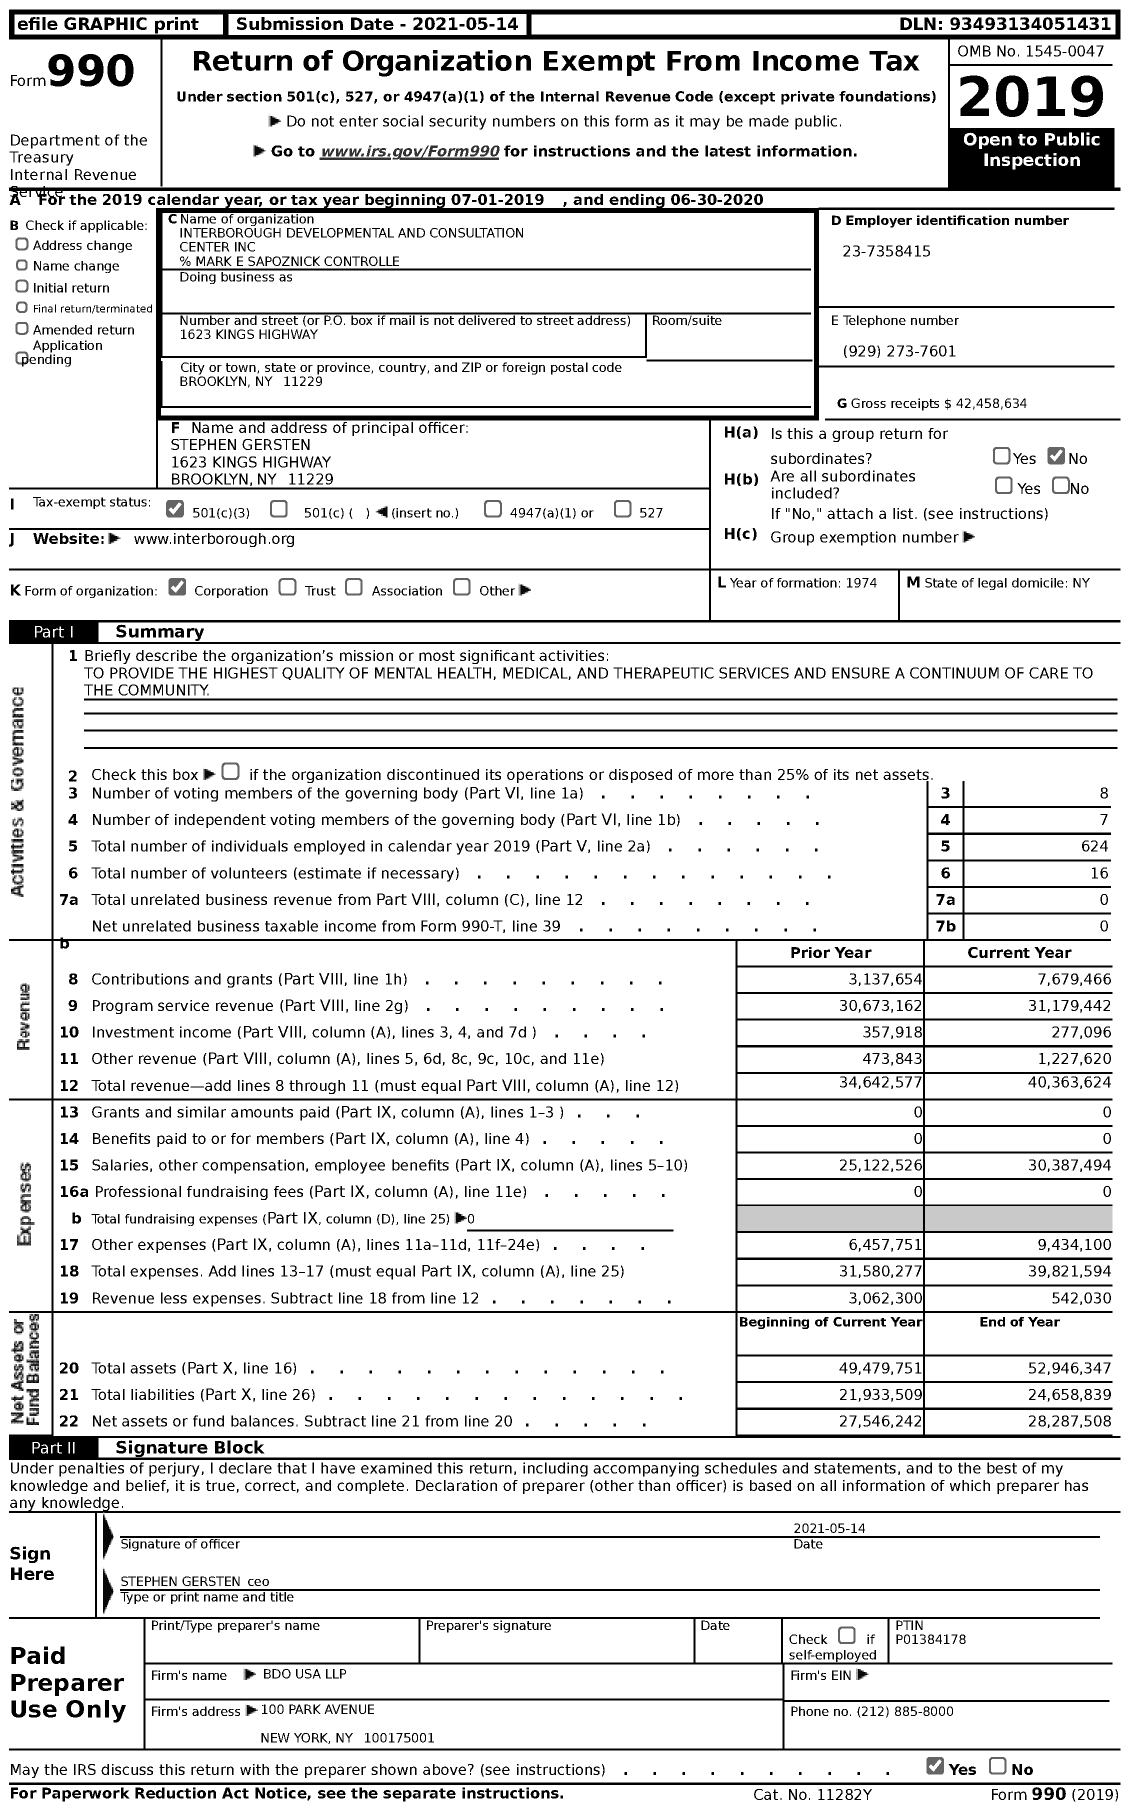 Image of first page of 2019 Form 990 for Interborough Developmental and Consultation Center (IDCC)